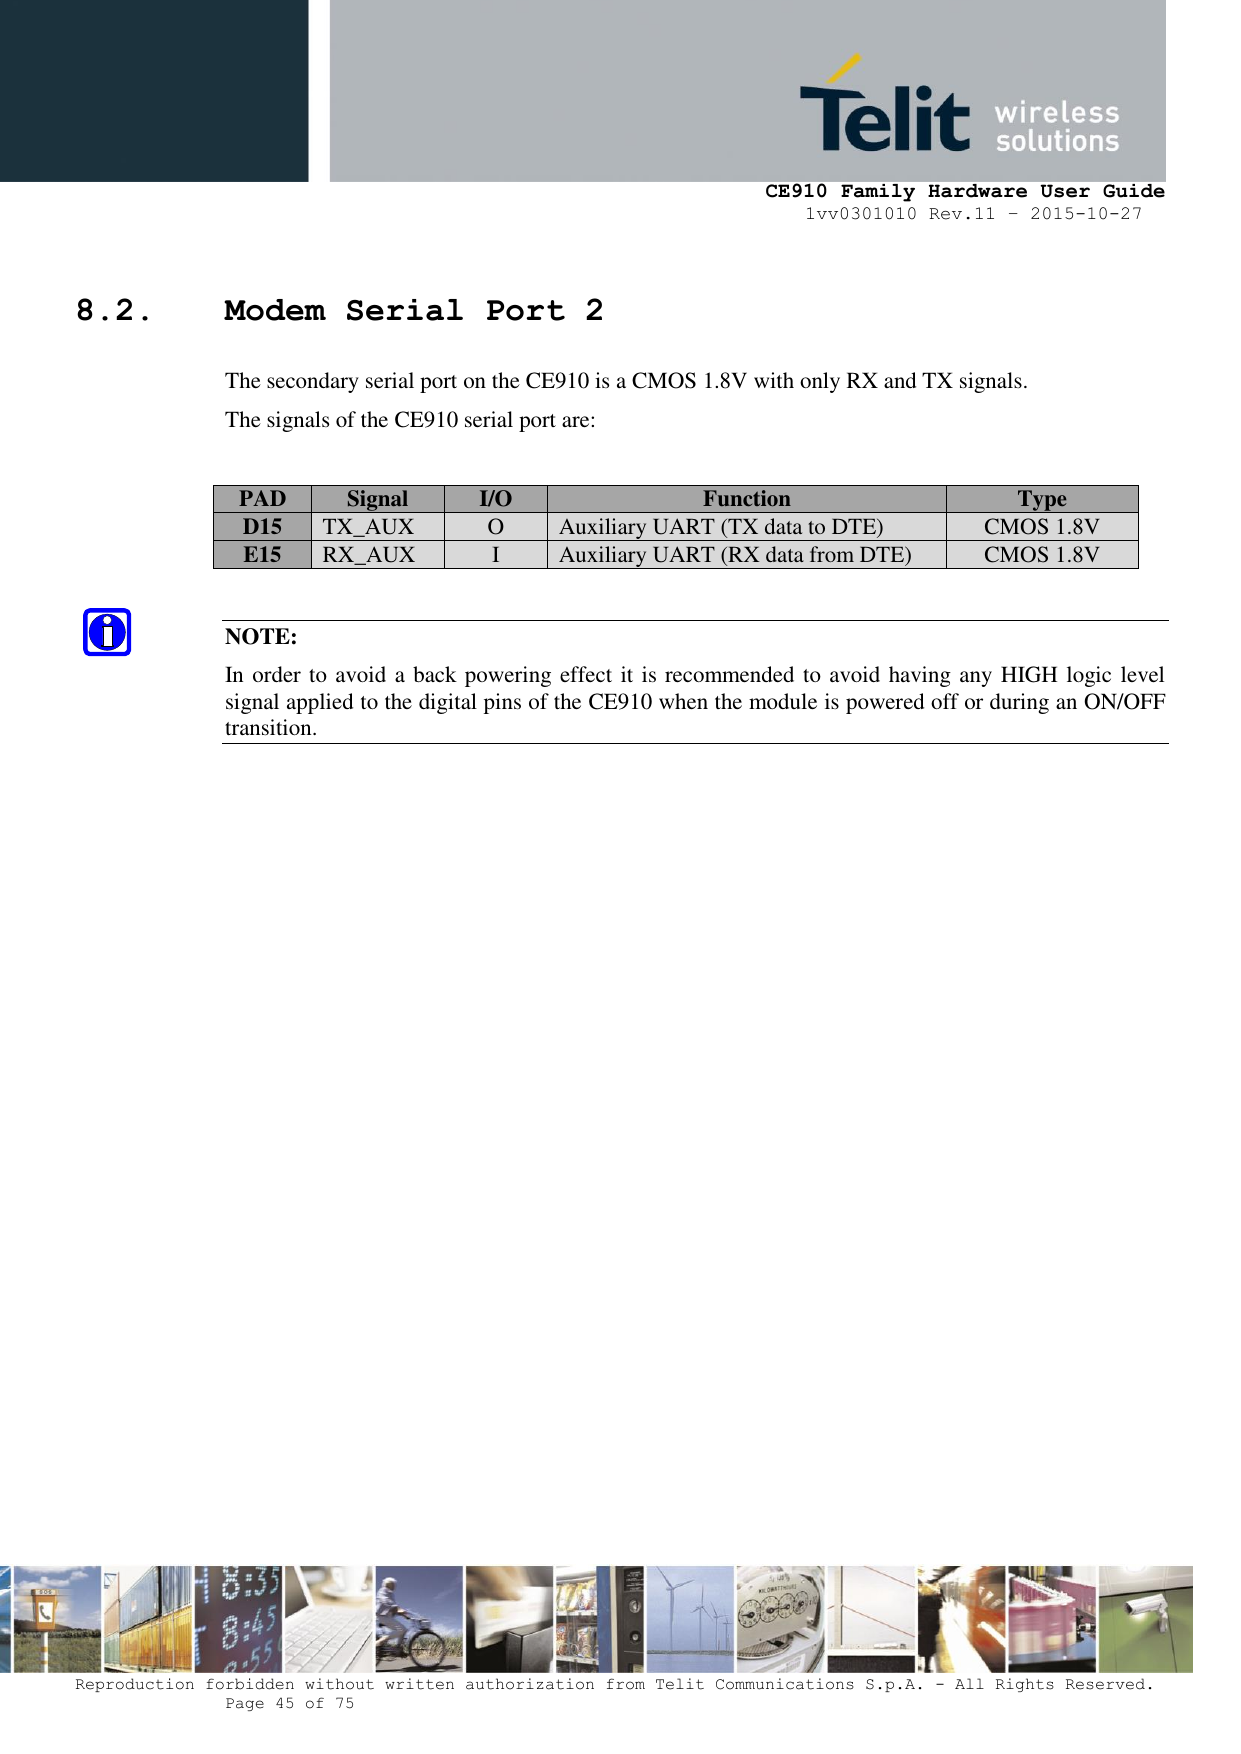     CE910 Family Hardware User Guide 1vv0301010 Rev.11 – 2015-10-27 Reproduction forbidden without written authorization from Telit Communications S.p.A. - All Rights Reserved.    Page 45 of 75                                                     8.2. Modem Serial Port 2 The secondary serial port on the CE910 is a CMOS 1.8V with only RX and TX signals. The signals of the CE910 serial port are:  PAD Signal I/O Function Type D15 TX_AUX O Auxiliary UART (TX data to DTE) CMOS 1.8V E15 RX_AUX I Auxiliary UART (RX data from DTE) CMOS 1.8V  NOTE: In order to avoid a back powering effect it is recommended to avoid having any HIGH logic level signal applied to the digital pins of the CE910 when the module is powered off or during an ON/OFF transition.                  